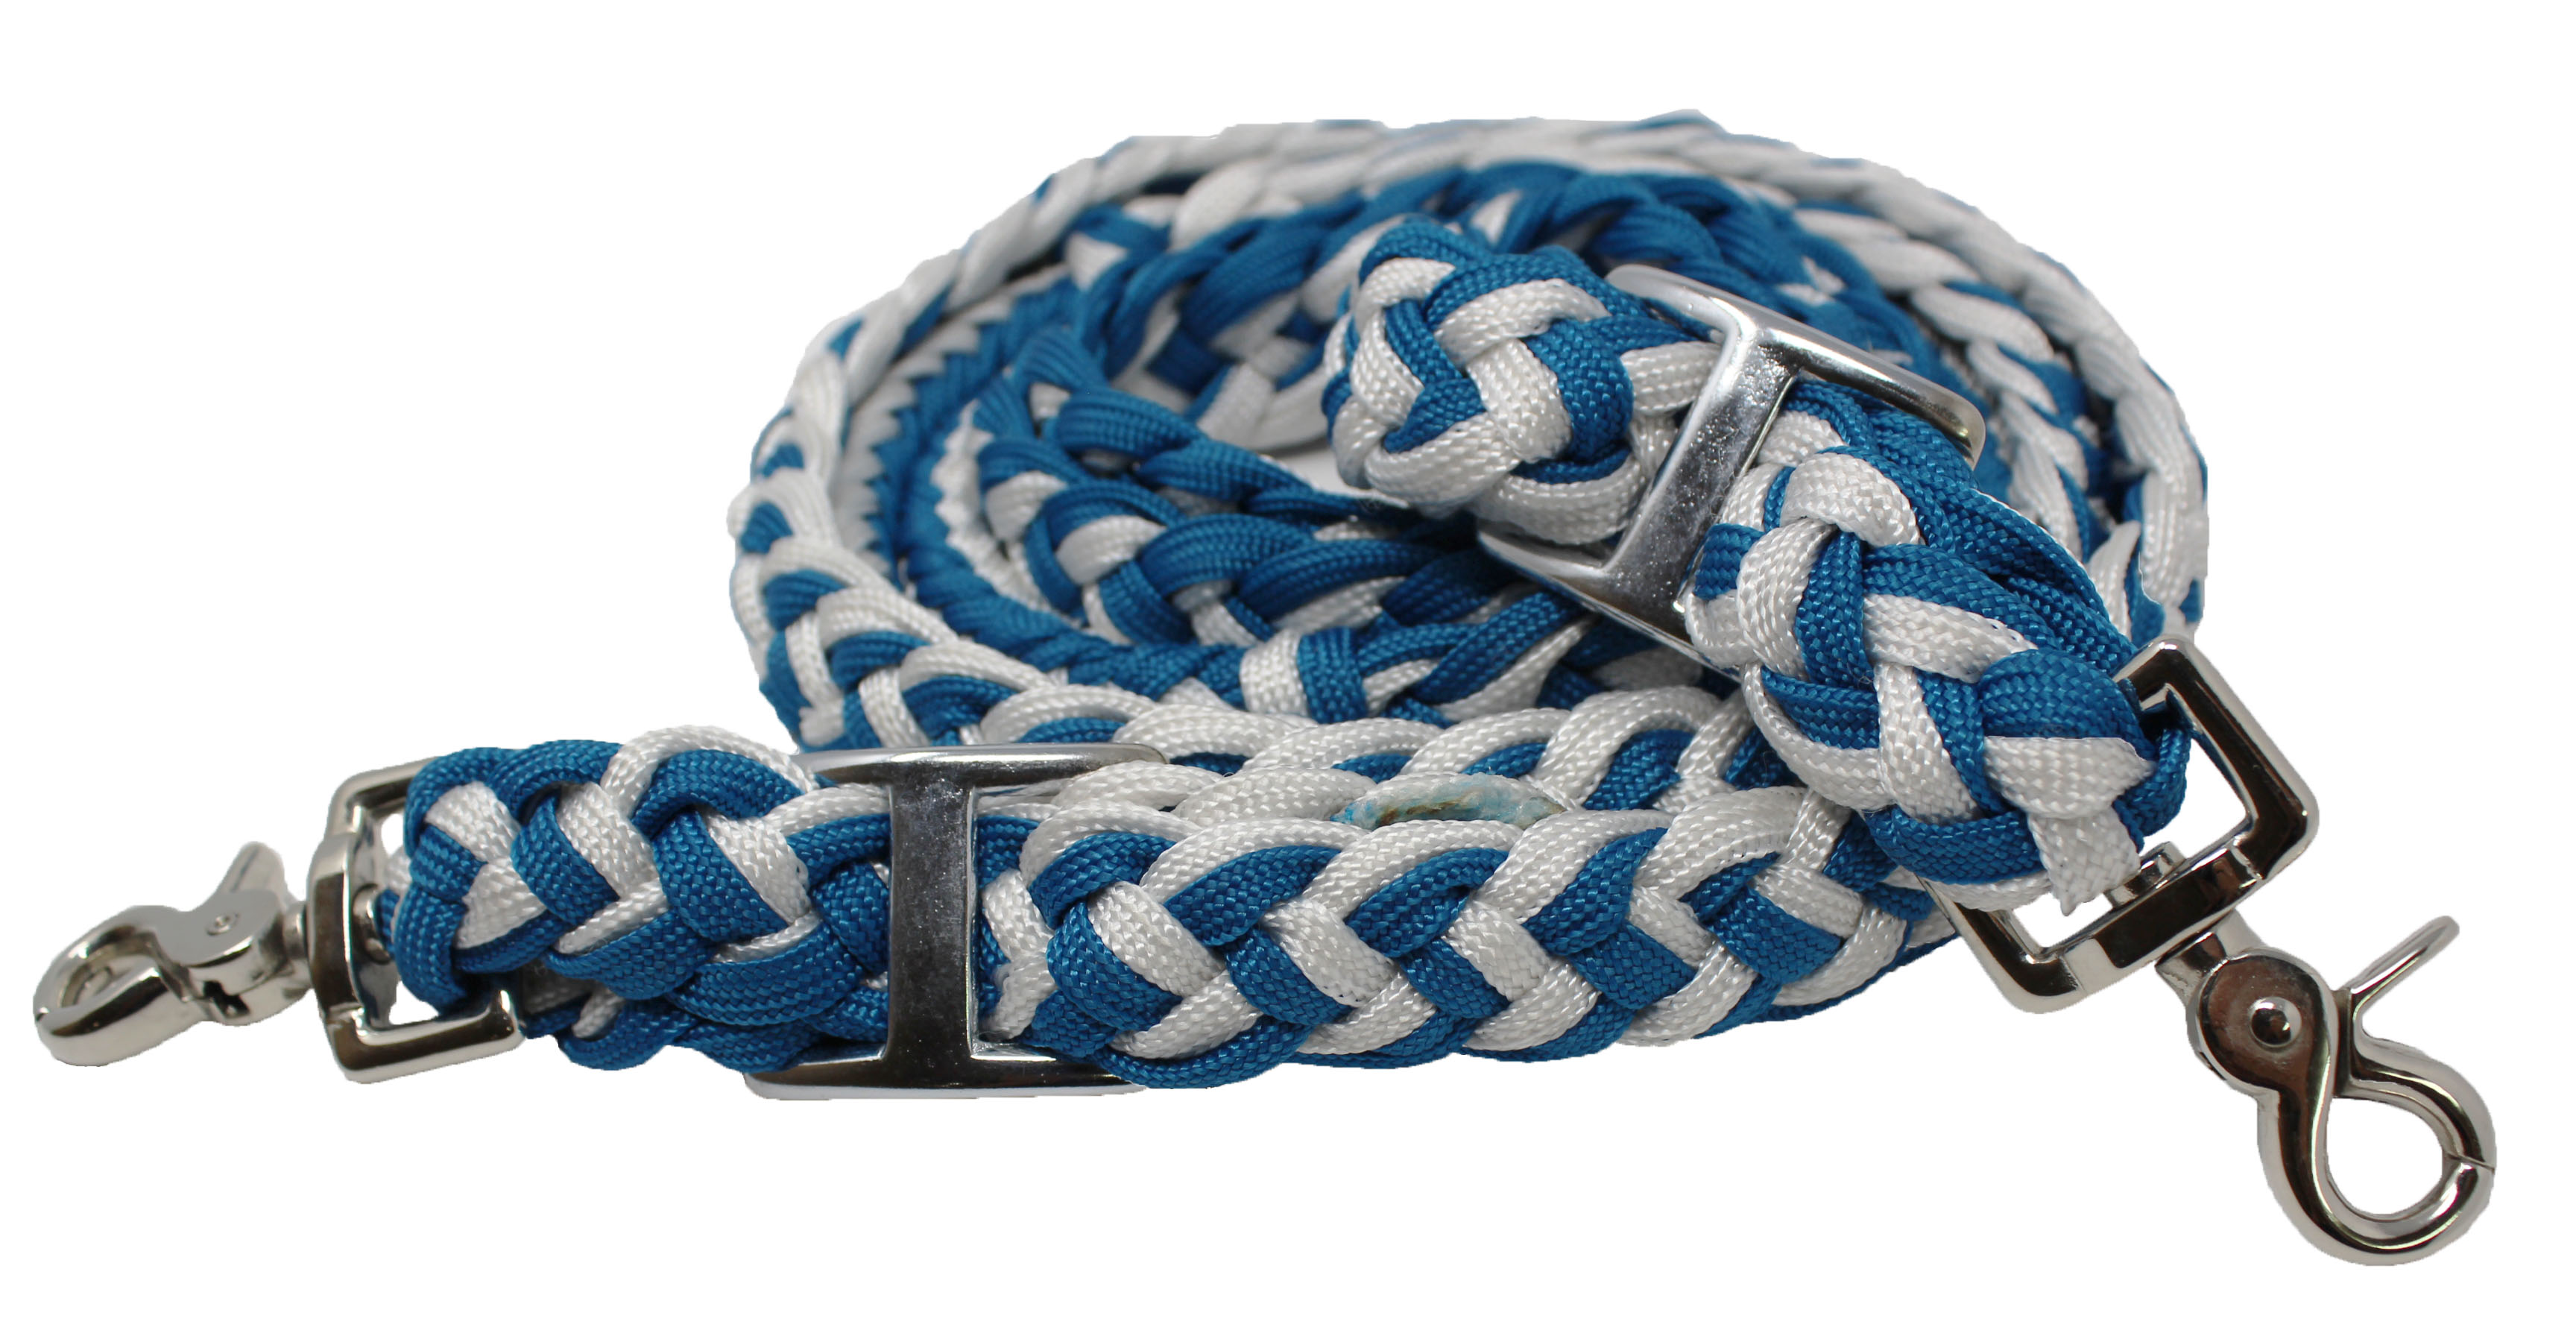 Horse Free shipping Portland Mall anywhere in the nation Roping Knotted Tack Western Reins Barrel Cotton 60 Braided